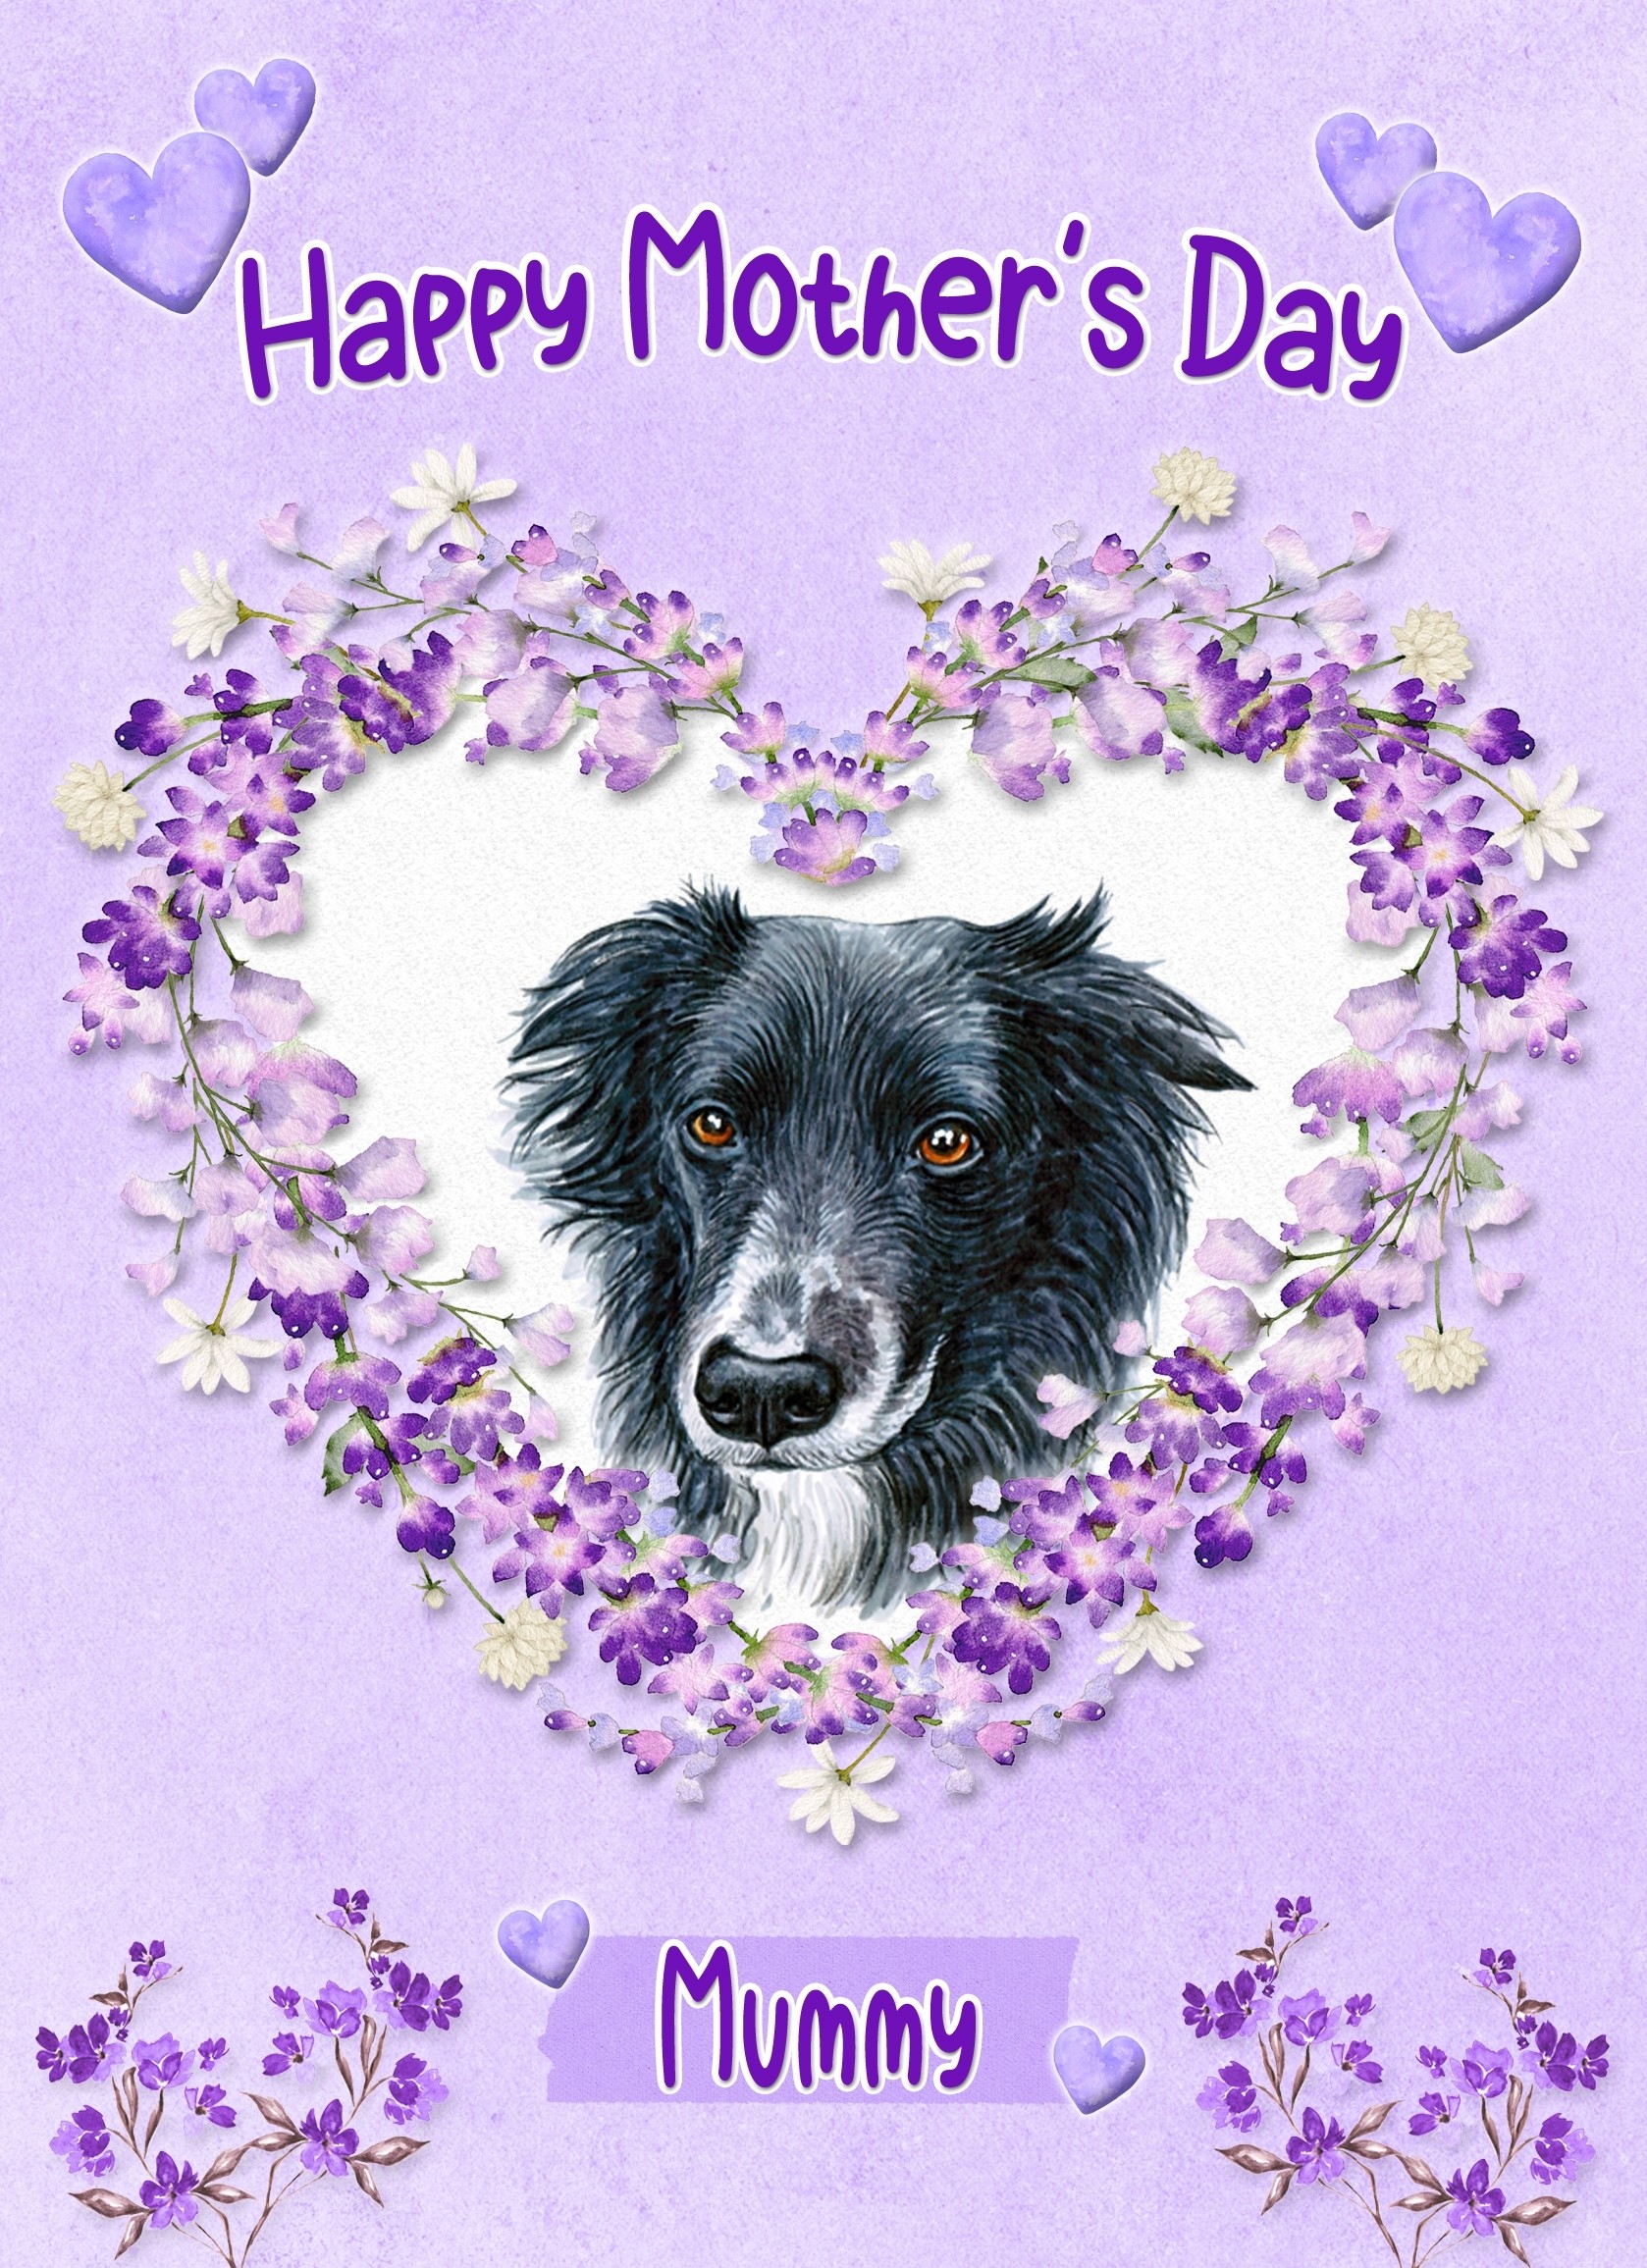 Border Collie Dog Mothers Day Card (Happy Mothers, Mummy)